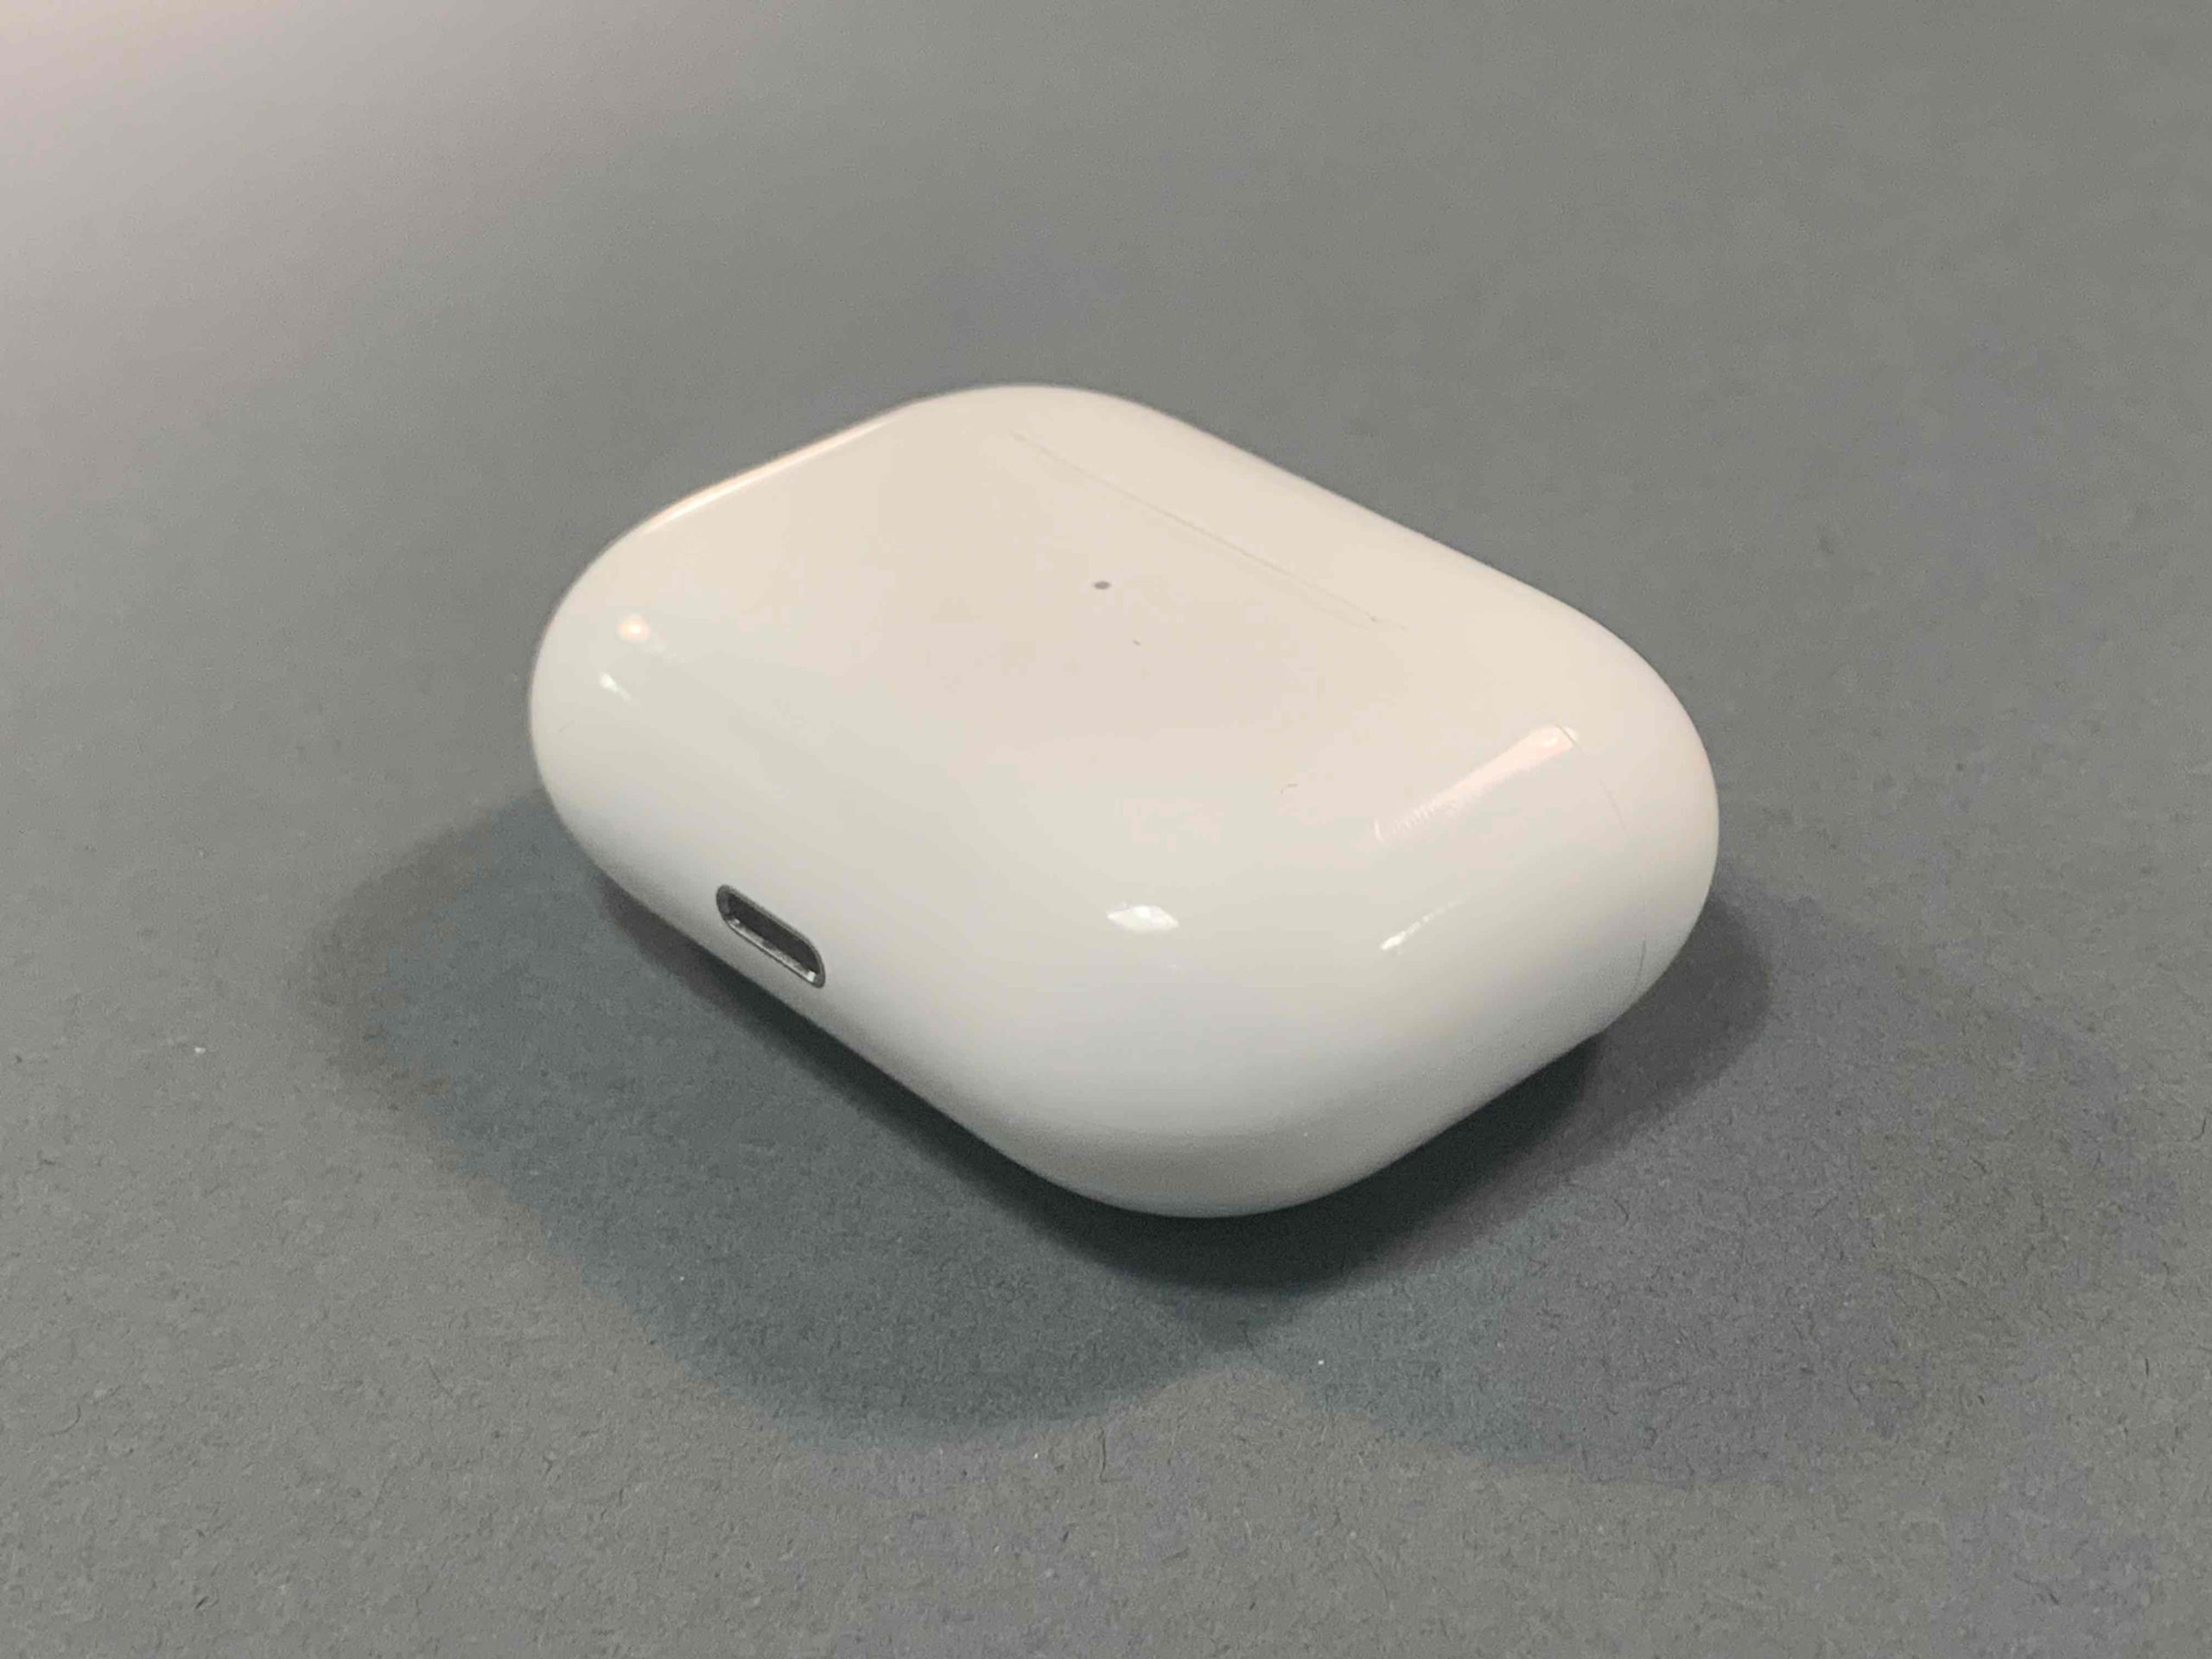 charge airpods charging case